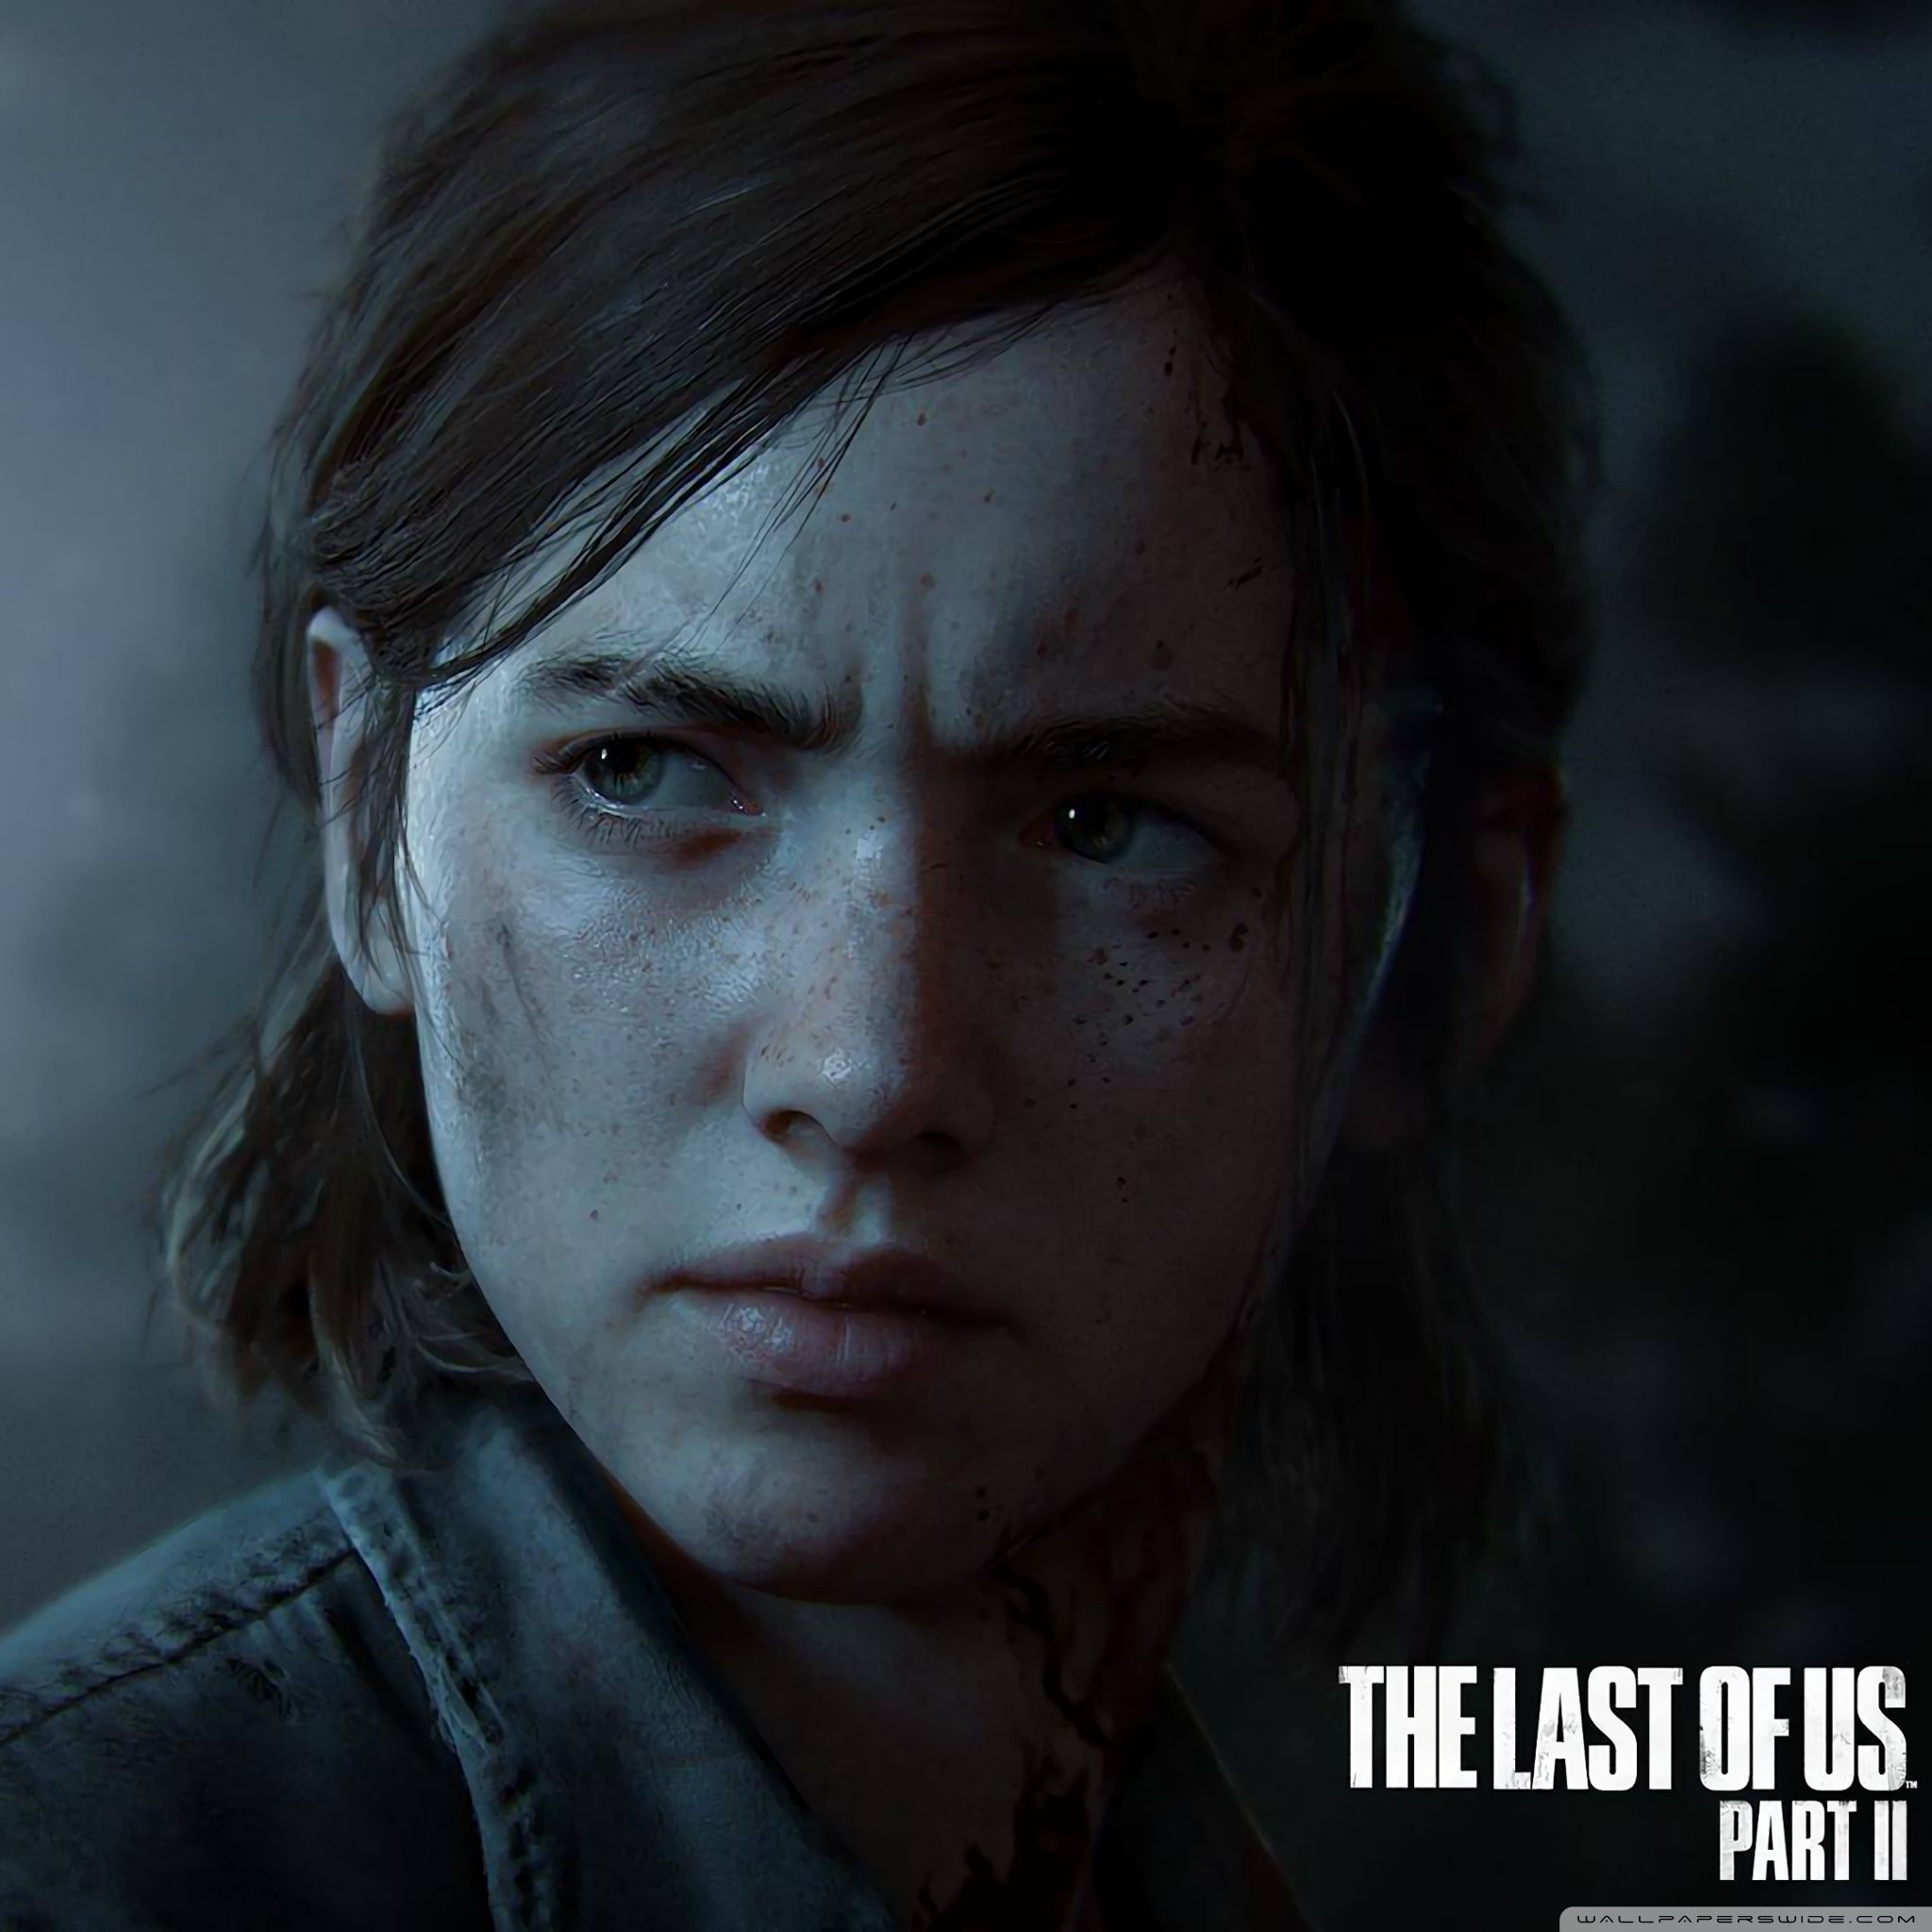 The Last of Us Part I and II Wallpaper by Thekingblader995 on